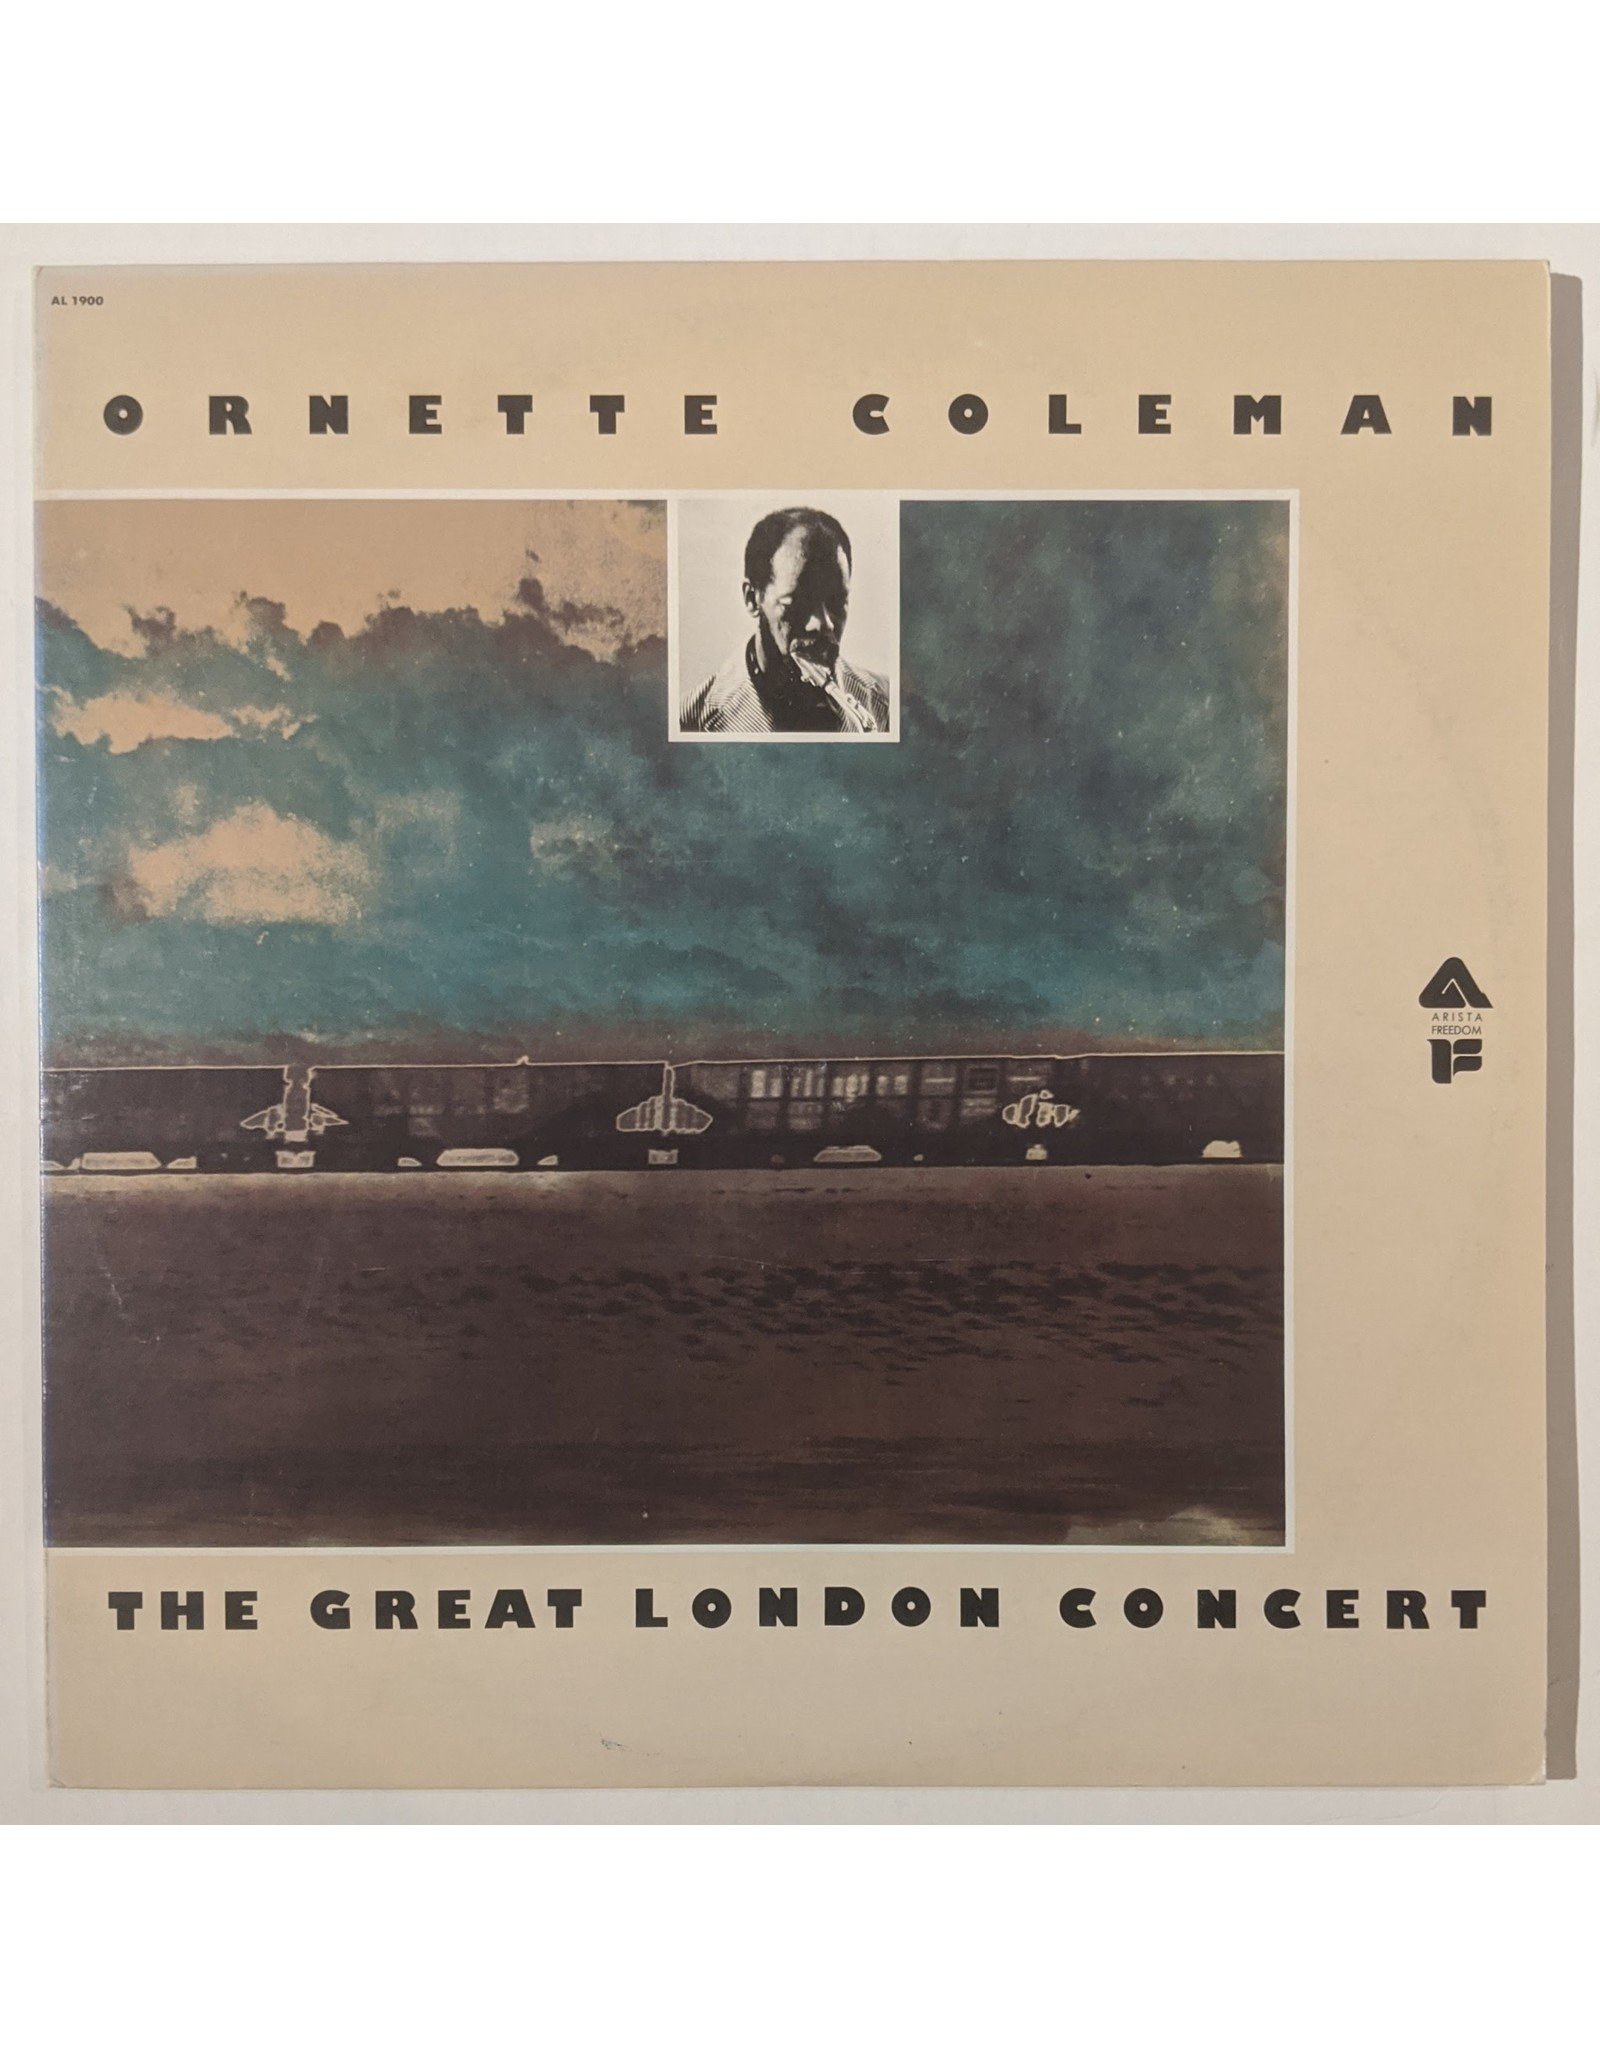 USED: Ornette Coleman: The Great London Concert LP